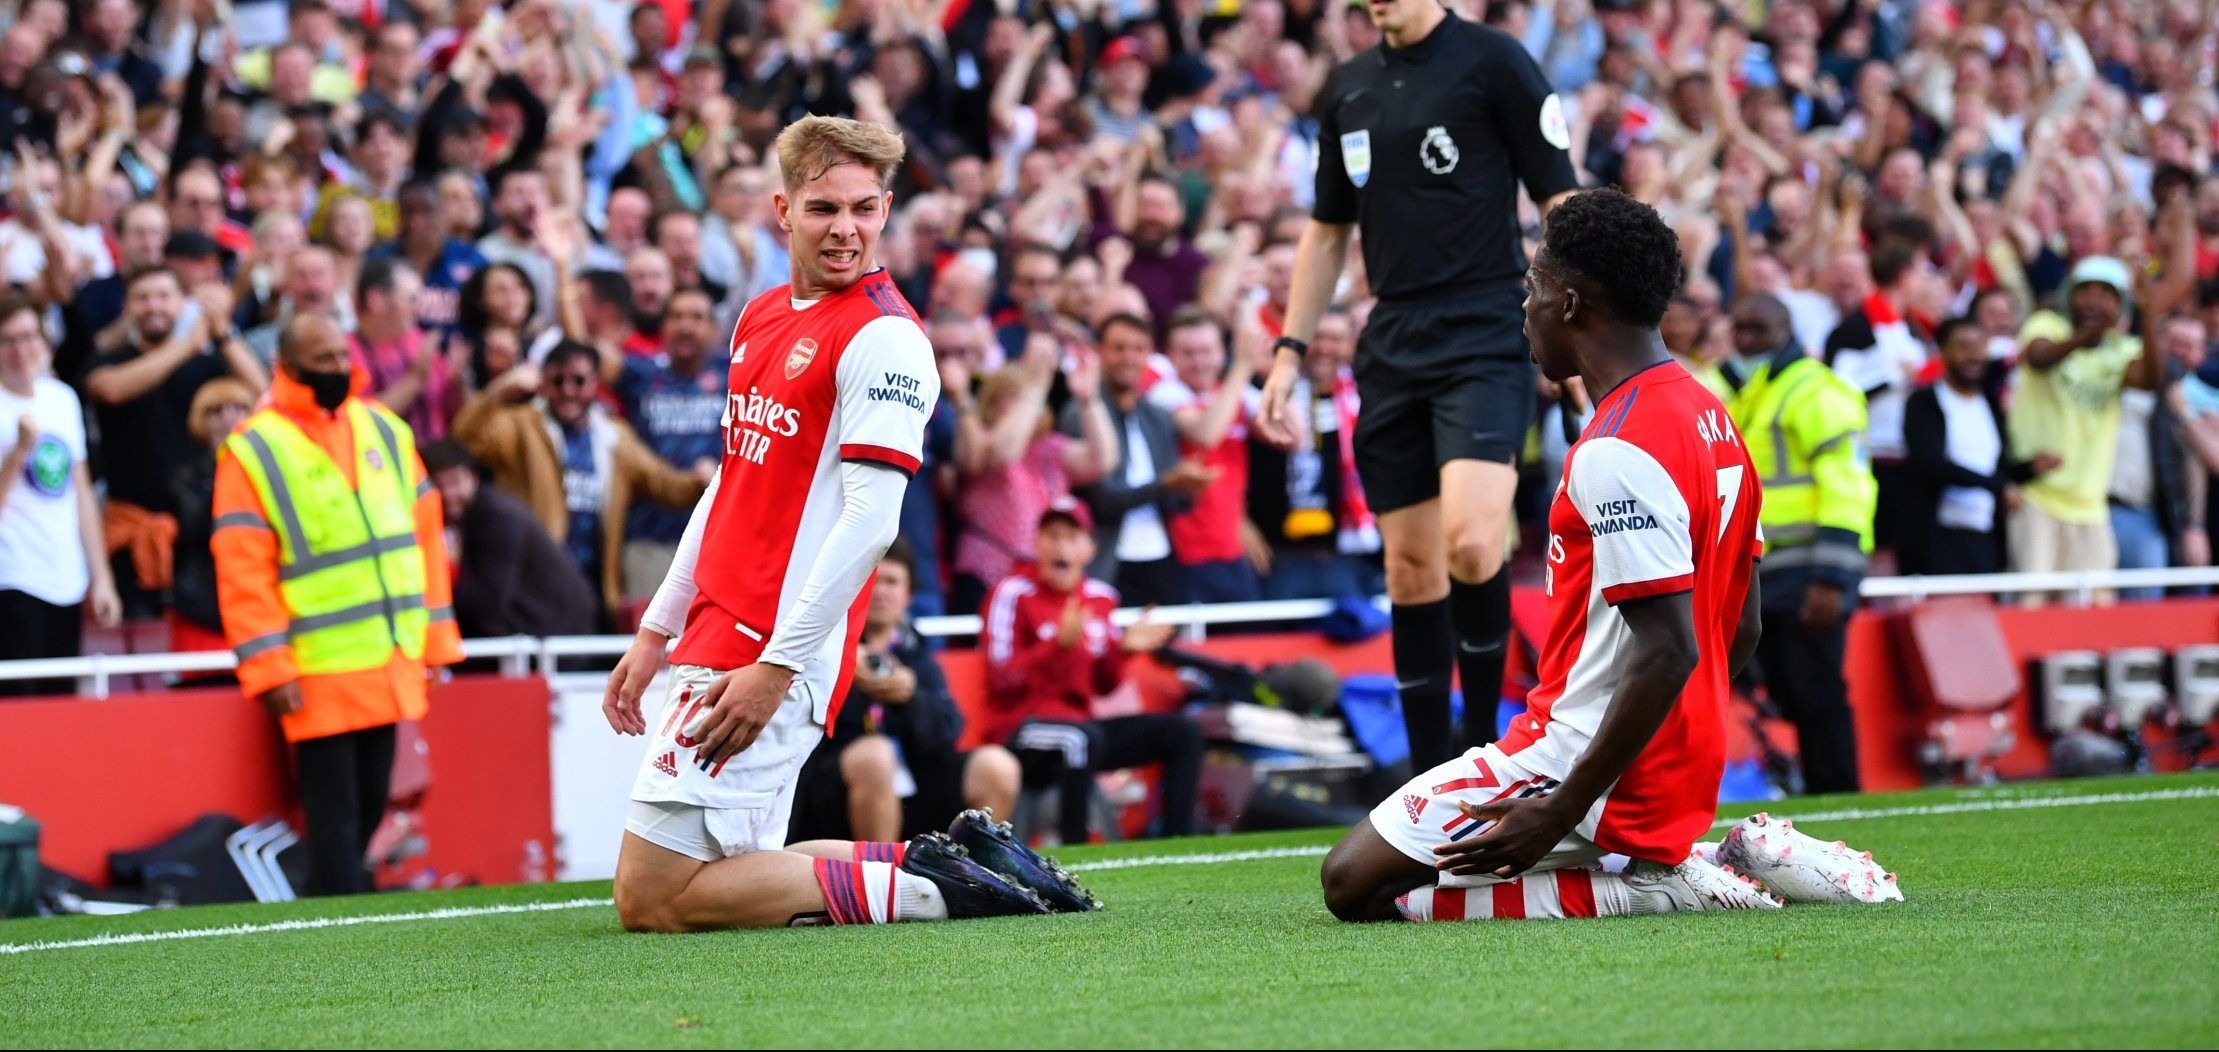 Arsenal duo Emile Smith Rowe and Bukayo Saka celebrate goal against Spurs in the north London derby